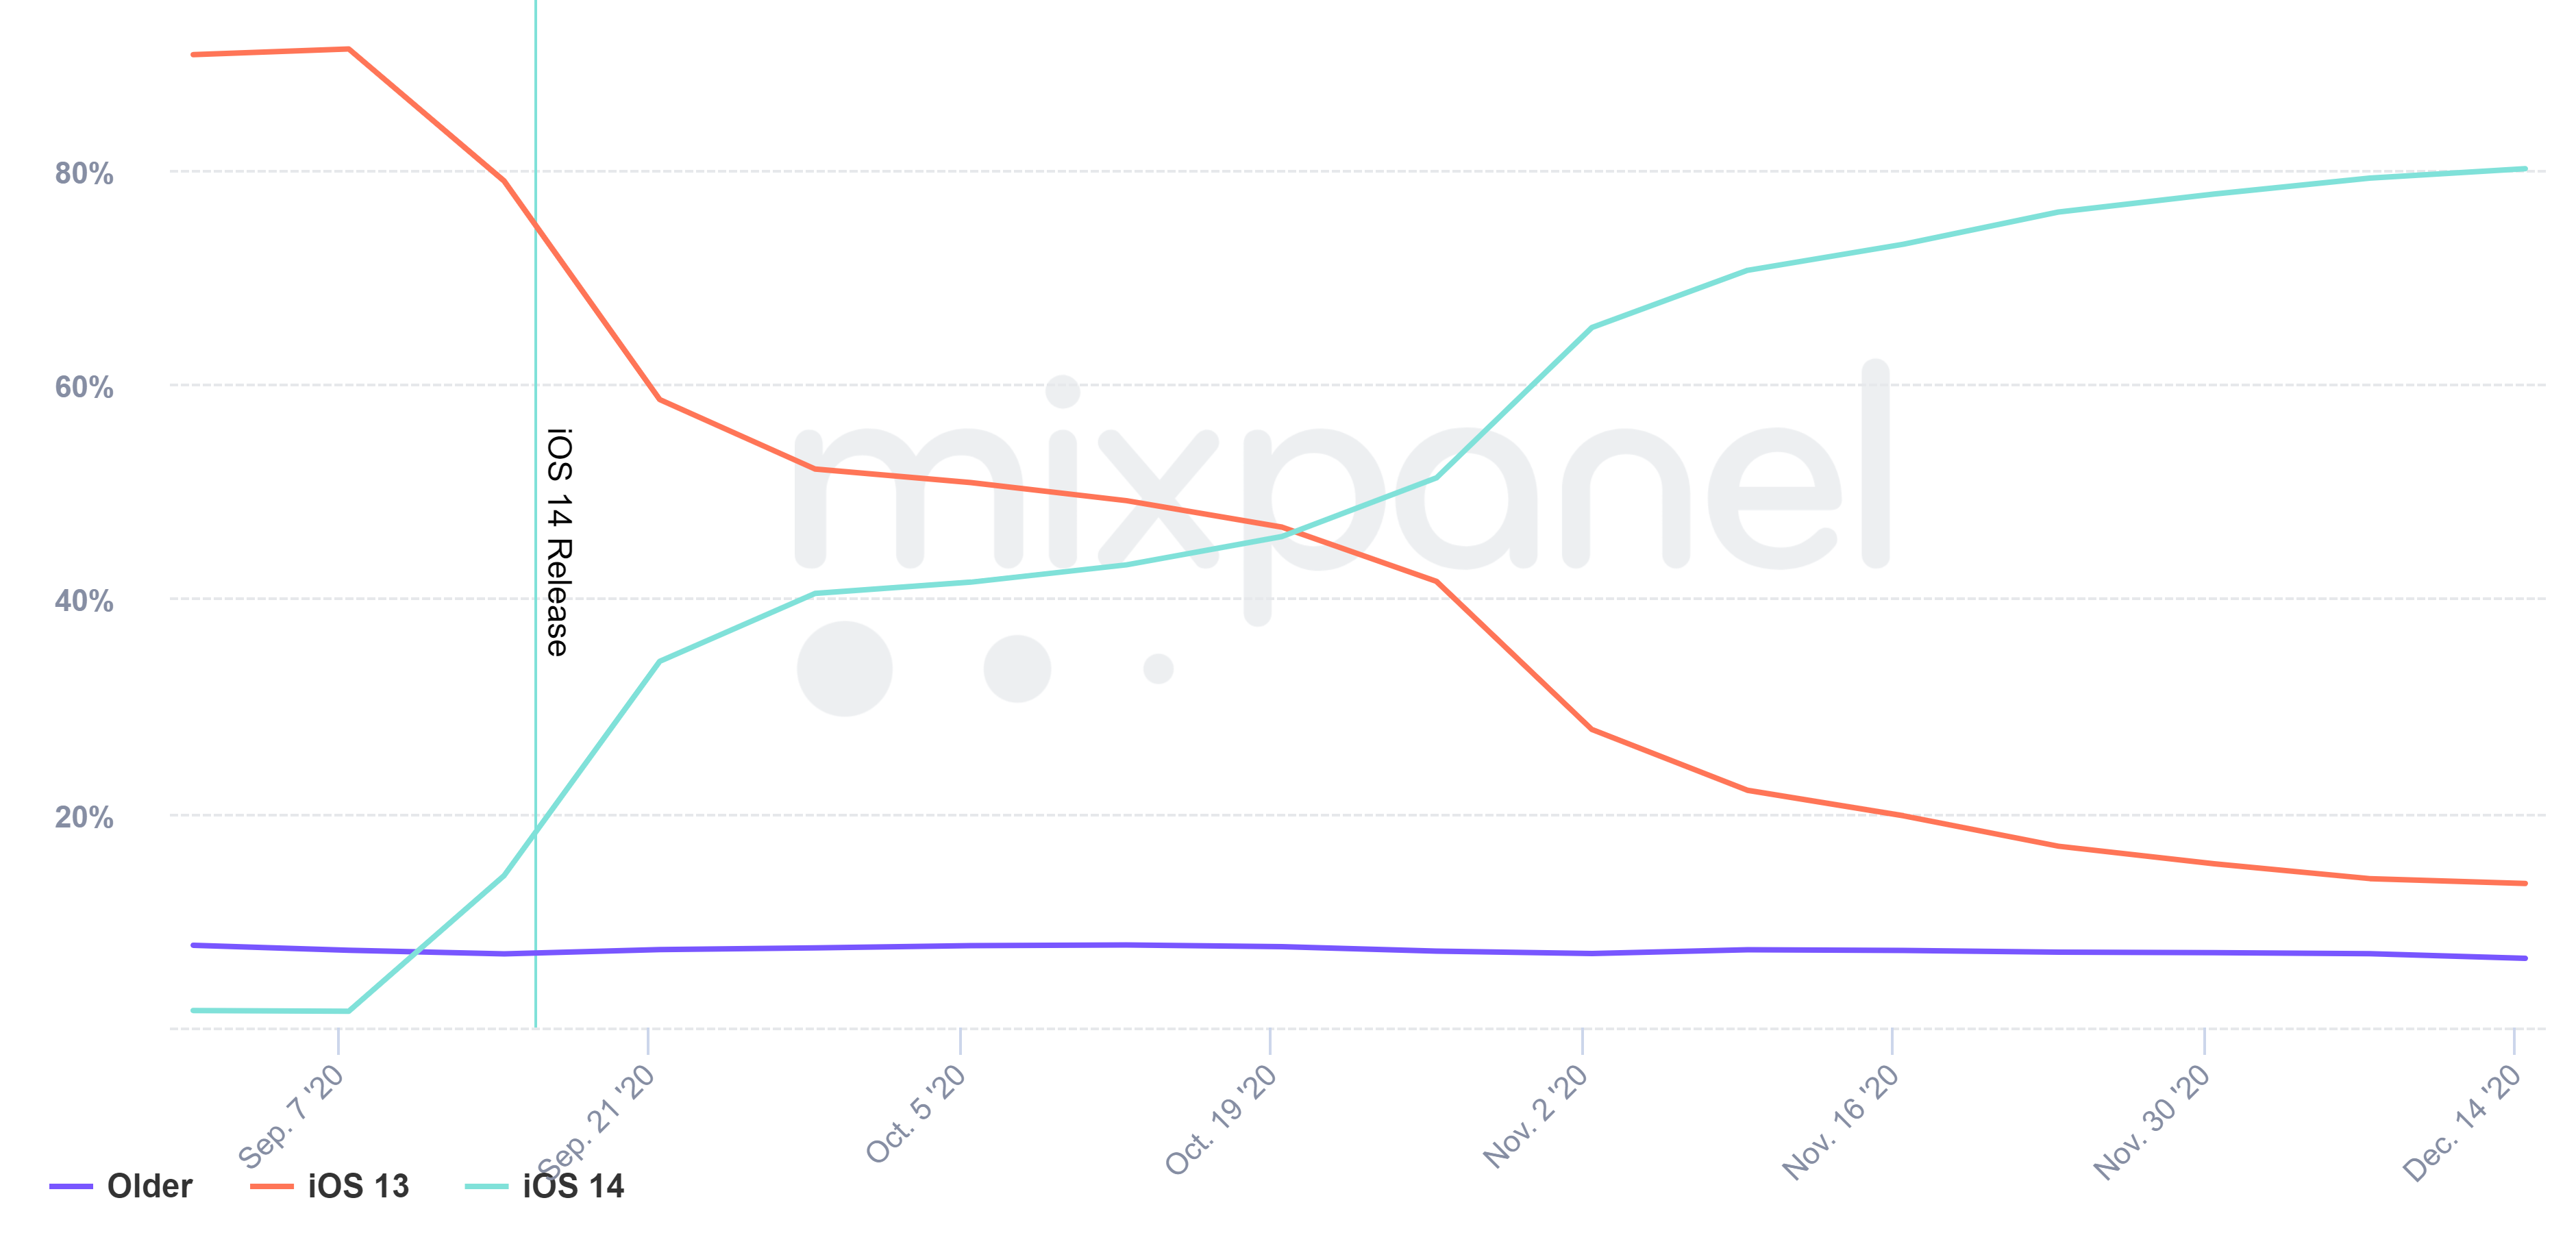 iOS 14 adoption stats as reported by Mixpanel - Nice: iOS 16&#039;s slow adoption rate hits 69% in December